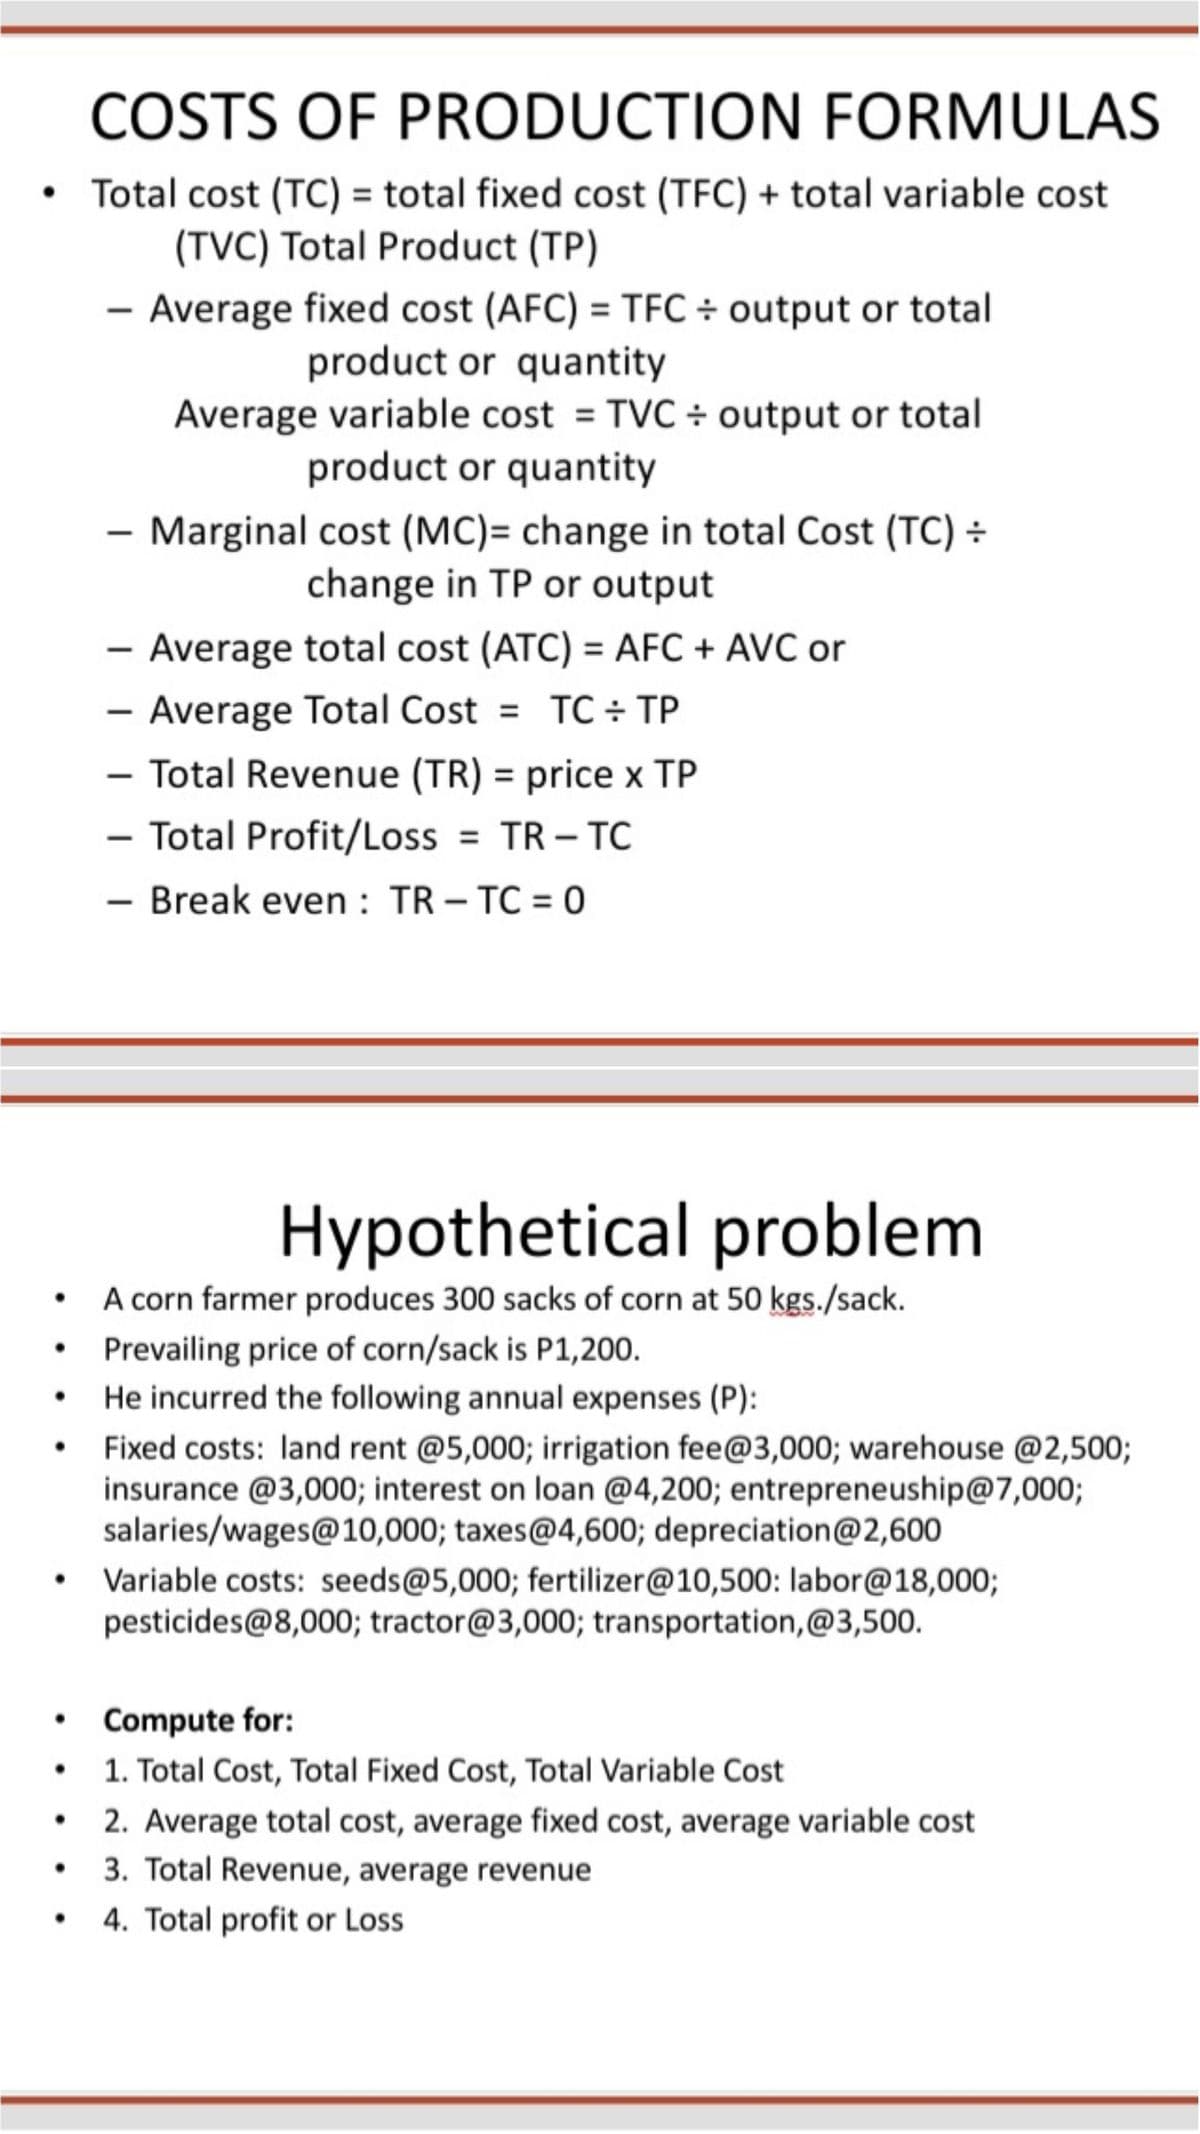 COSTS OF PRODUCTION FORMULAS
Total cost (TC) = total fixed cost (TFC) + total variable cost
(TVC) Total Product (TP)
- Average fixed cost (AFC) = TFC ÷ output or total
product or quantity
Average variable cost = TVC ÷ output or total
product or quantity
- Marginal cost (MC)= change in total Cost (TC) ÷
change in TP or output
- Average total cost (ATC) = AFC + AVC or
- Average Total Cost = TC ÷ TP
- Total Revenue (TR) = price x TP
-
%3D
-
- Total Profit/Loss = TR – TC
-
- Break even : TR – TC = 0
Hypothetical problem
A corn farmer produces 300 sacks of corn at 50 kgs./sack.
Prevailing price of corn/sack is P1,200.
He incurred the following annual expenses (P):
Fixed costs: land rent @5,000; irrigation fee@3,000; warehouse @2,500;
insurance @3,000; interest on loan @4,200; entrepreneuship@7,000;
salaries/wages@10,000; taxes@4,600; depreciation@2,600
Variable costs: seeds@5,000; fertilizer@10,500: labor@18,000;
pesticides@8,000; tractor@3,000; transportation,@3,500.
Compute for:
1. Total Cost, Total Fixed Cost, Total Variable Cost
2. Average total cost, average fixed cost, average variable cost
3. Total Revenue, average revenue
4. Total profit or Loss
